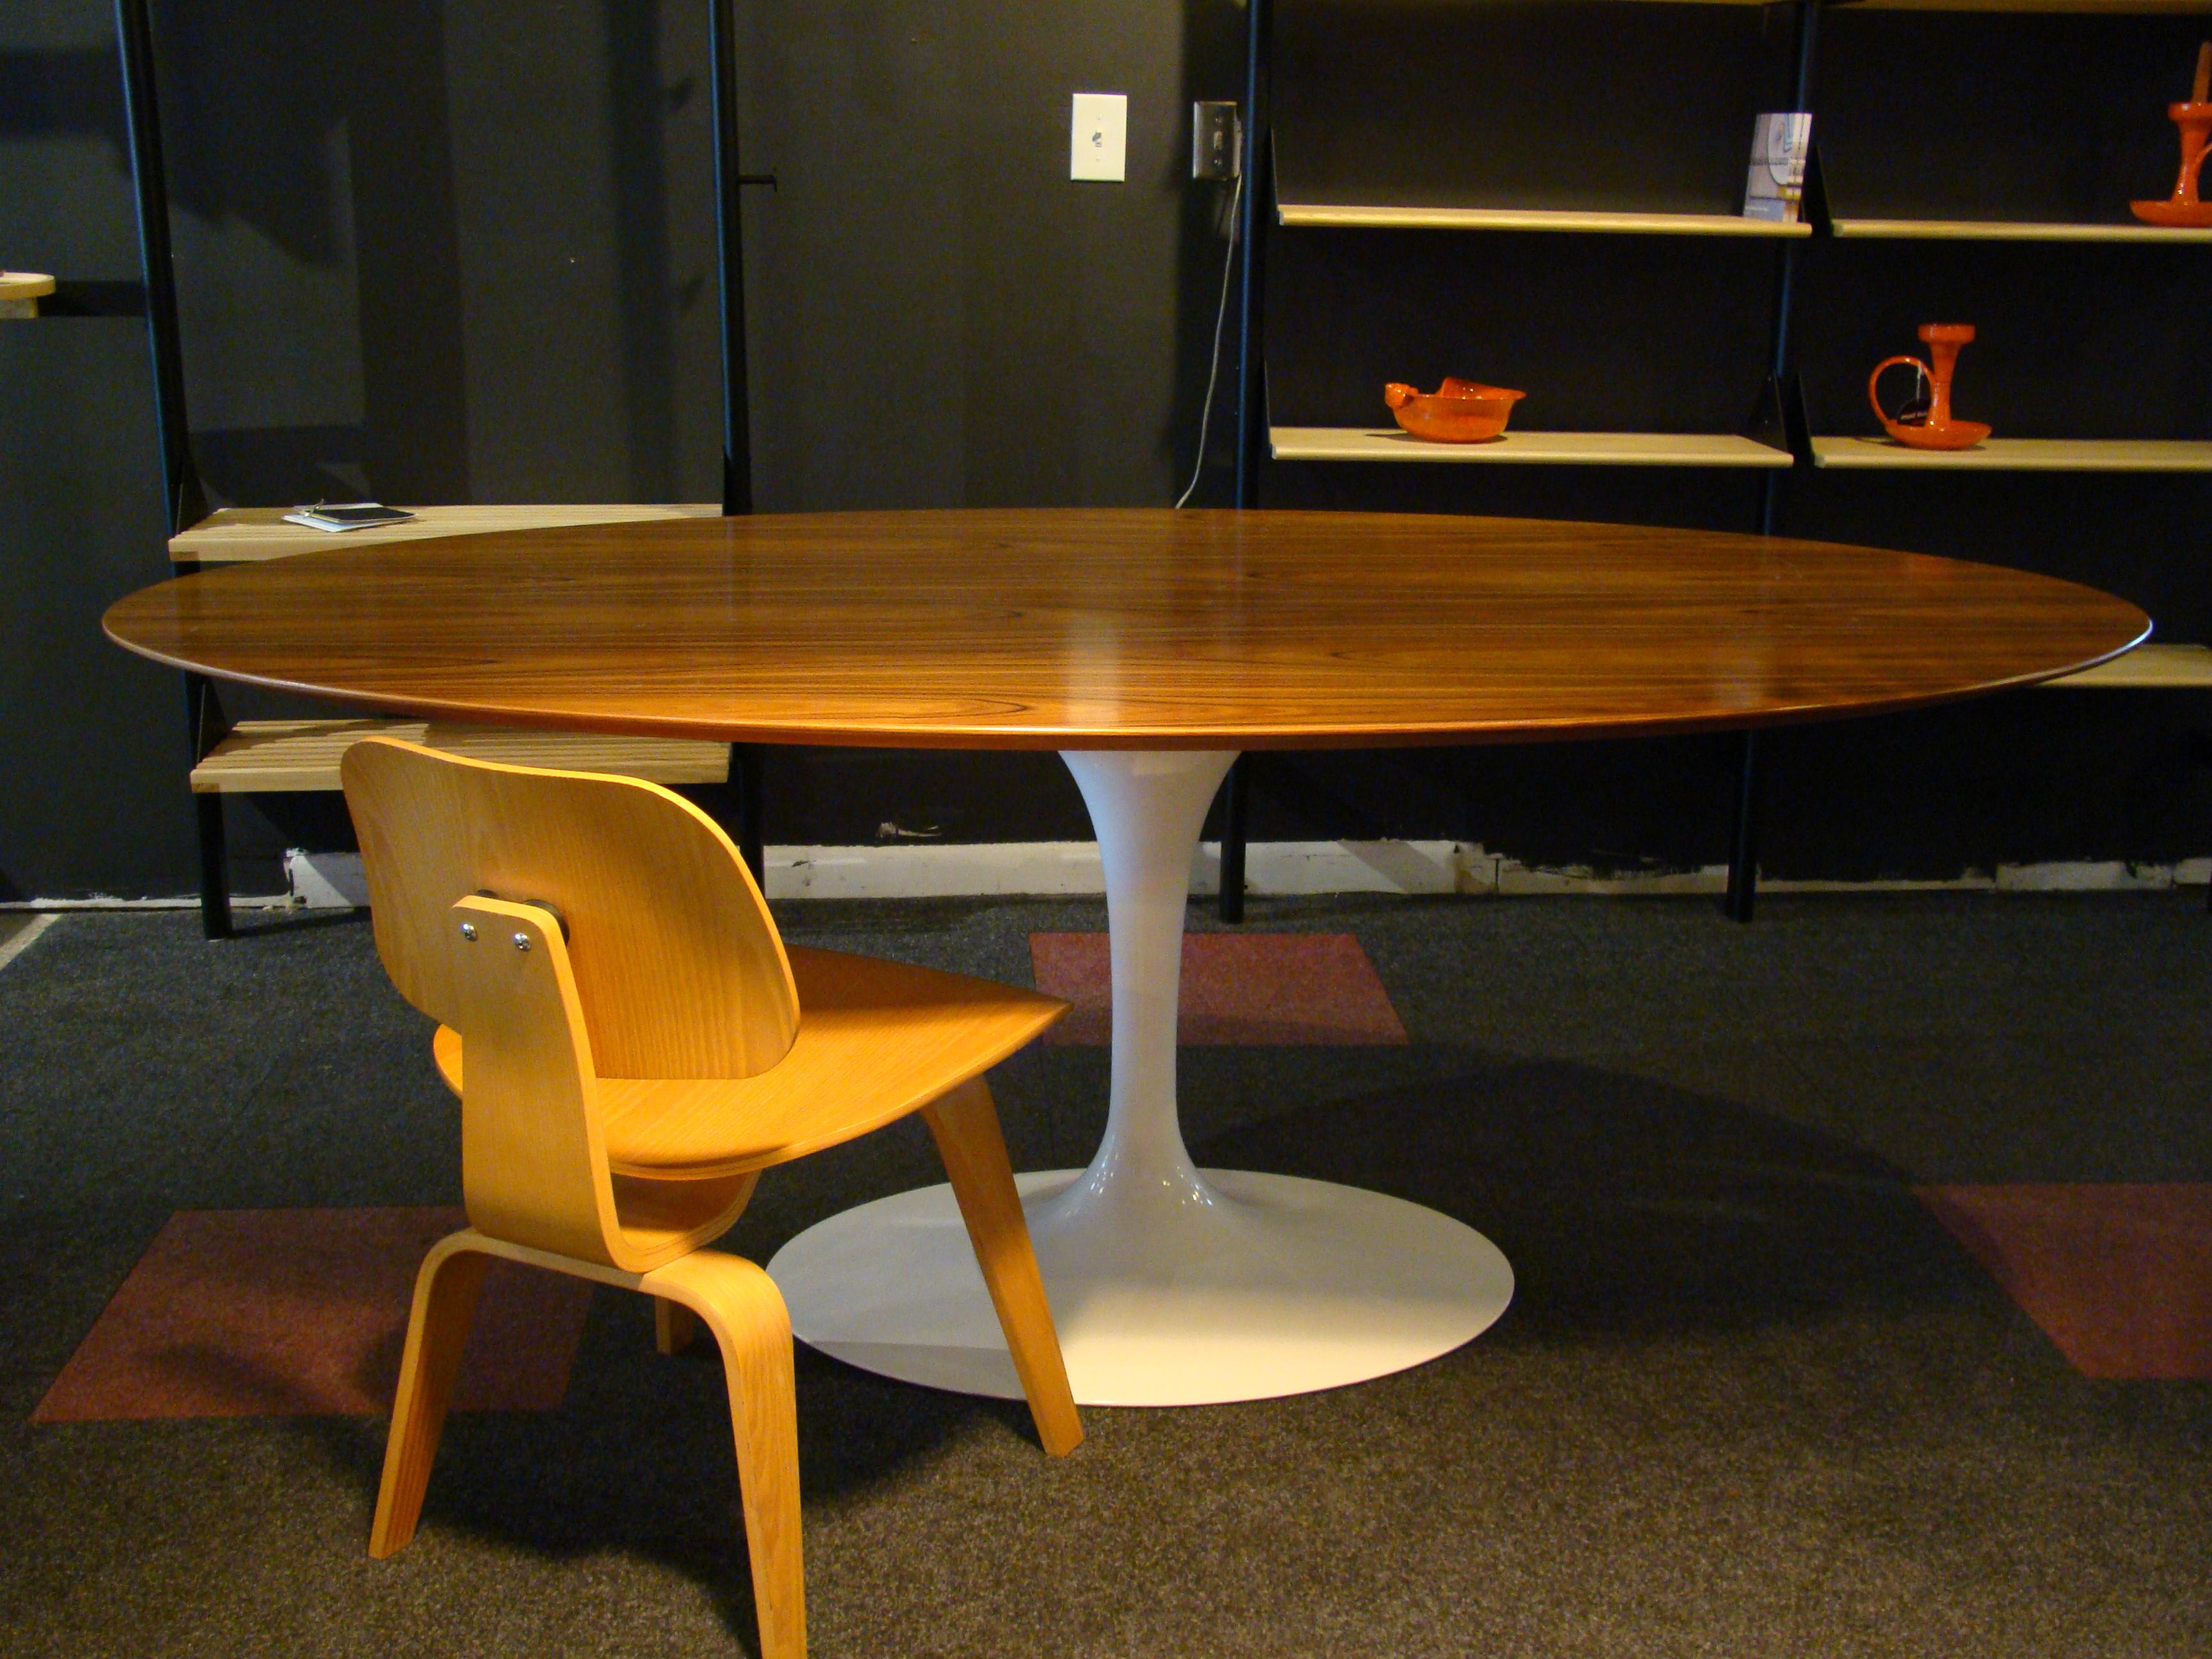 Highly desirable teak top oval Saarinen tulip table manufactured by Knoll International. This example is manufactured post Y2K with a 